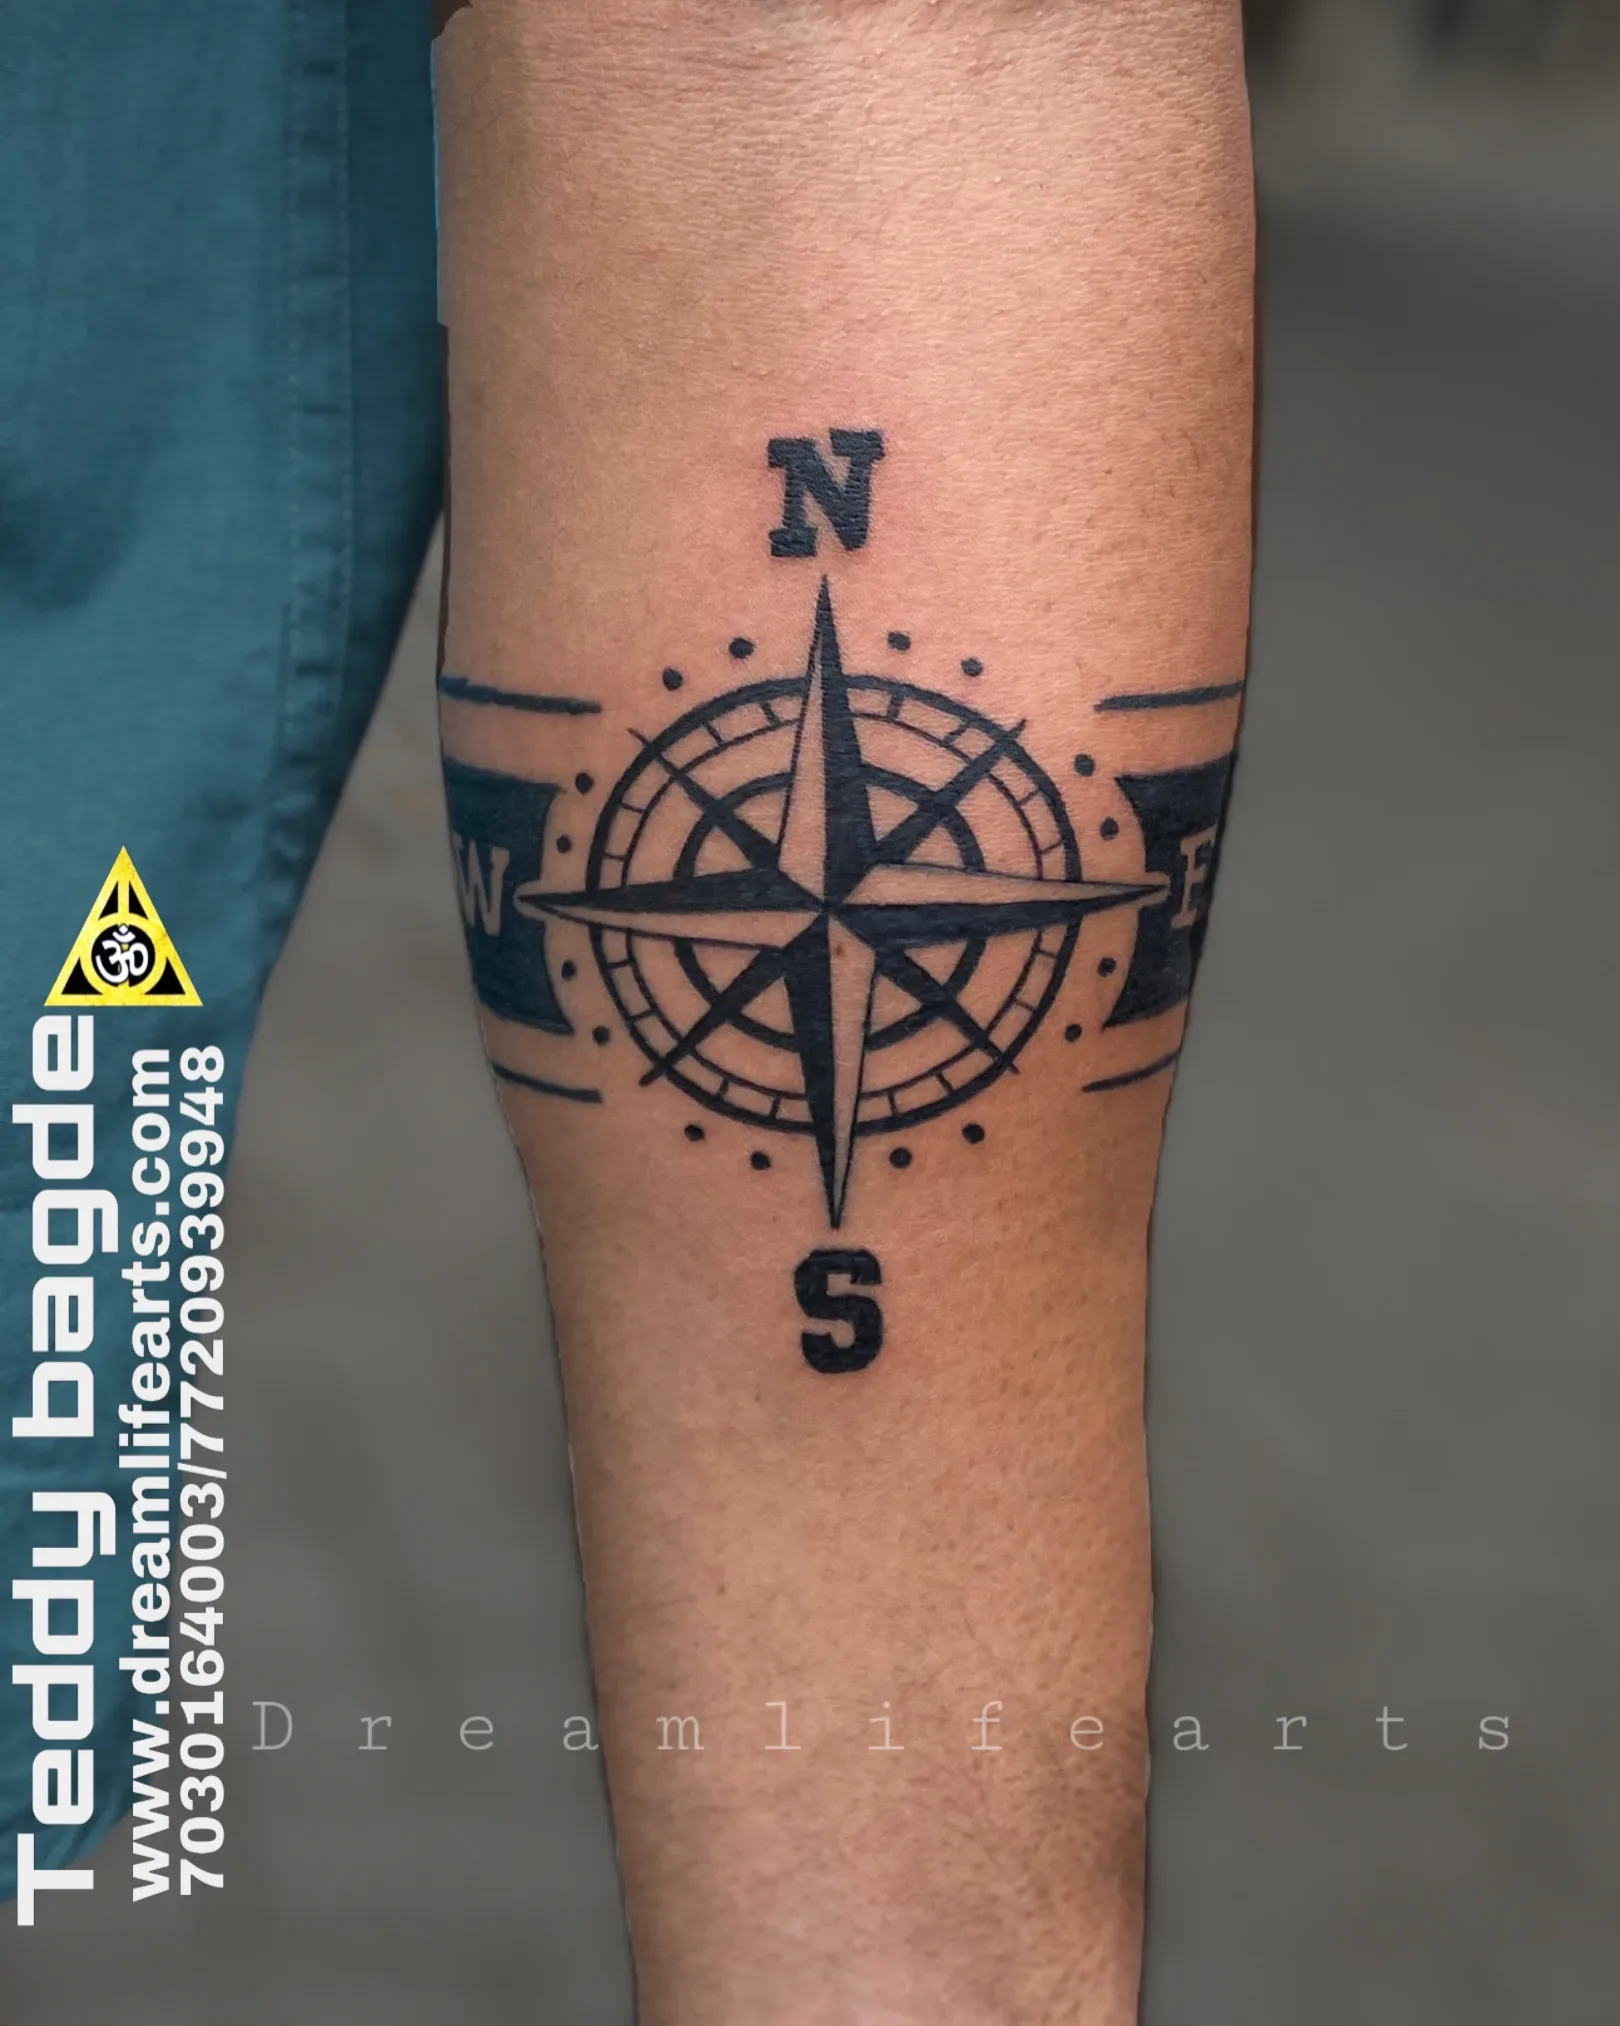 Geometric armband with a compass  a special thanks to tattookaivalya For  guiding me  geometrictattoo armband armbandtattoo dotworktattoo   By Mr Tangle Head Tattoo  Facebook